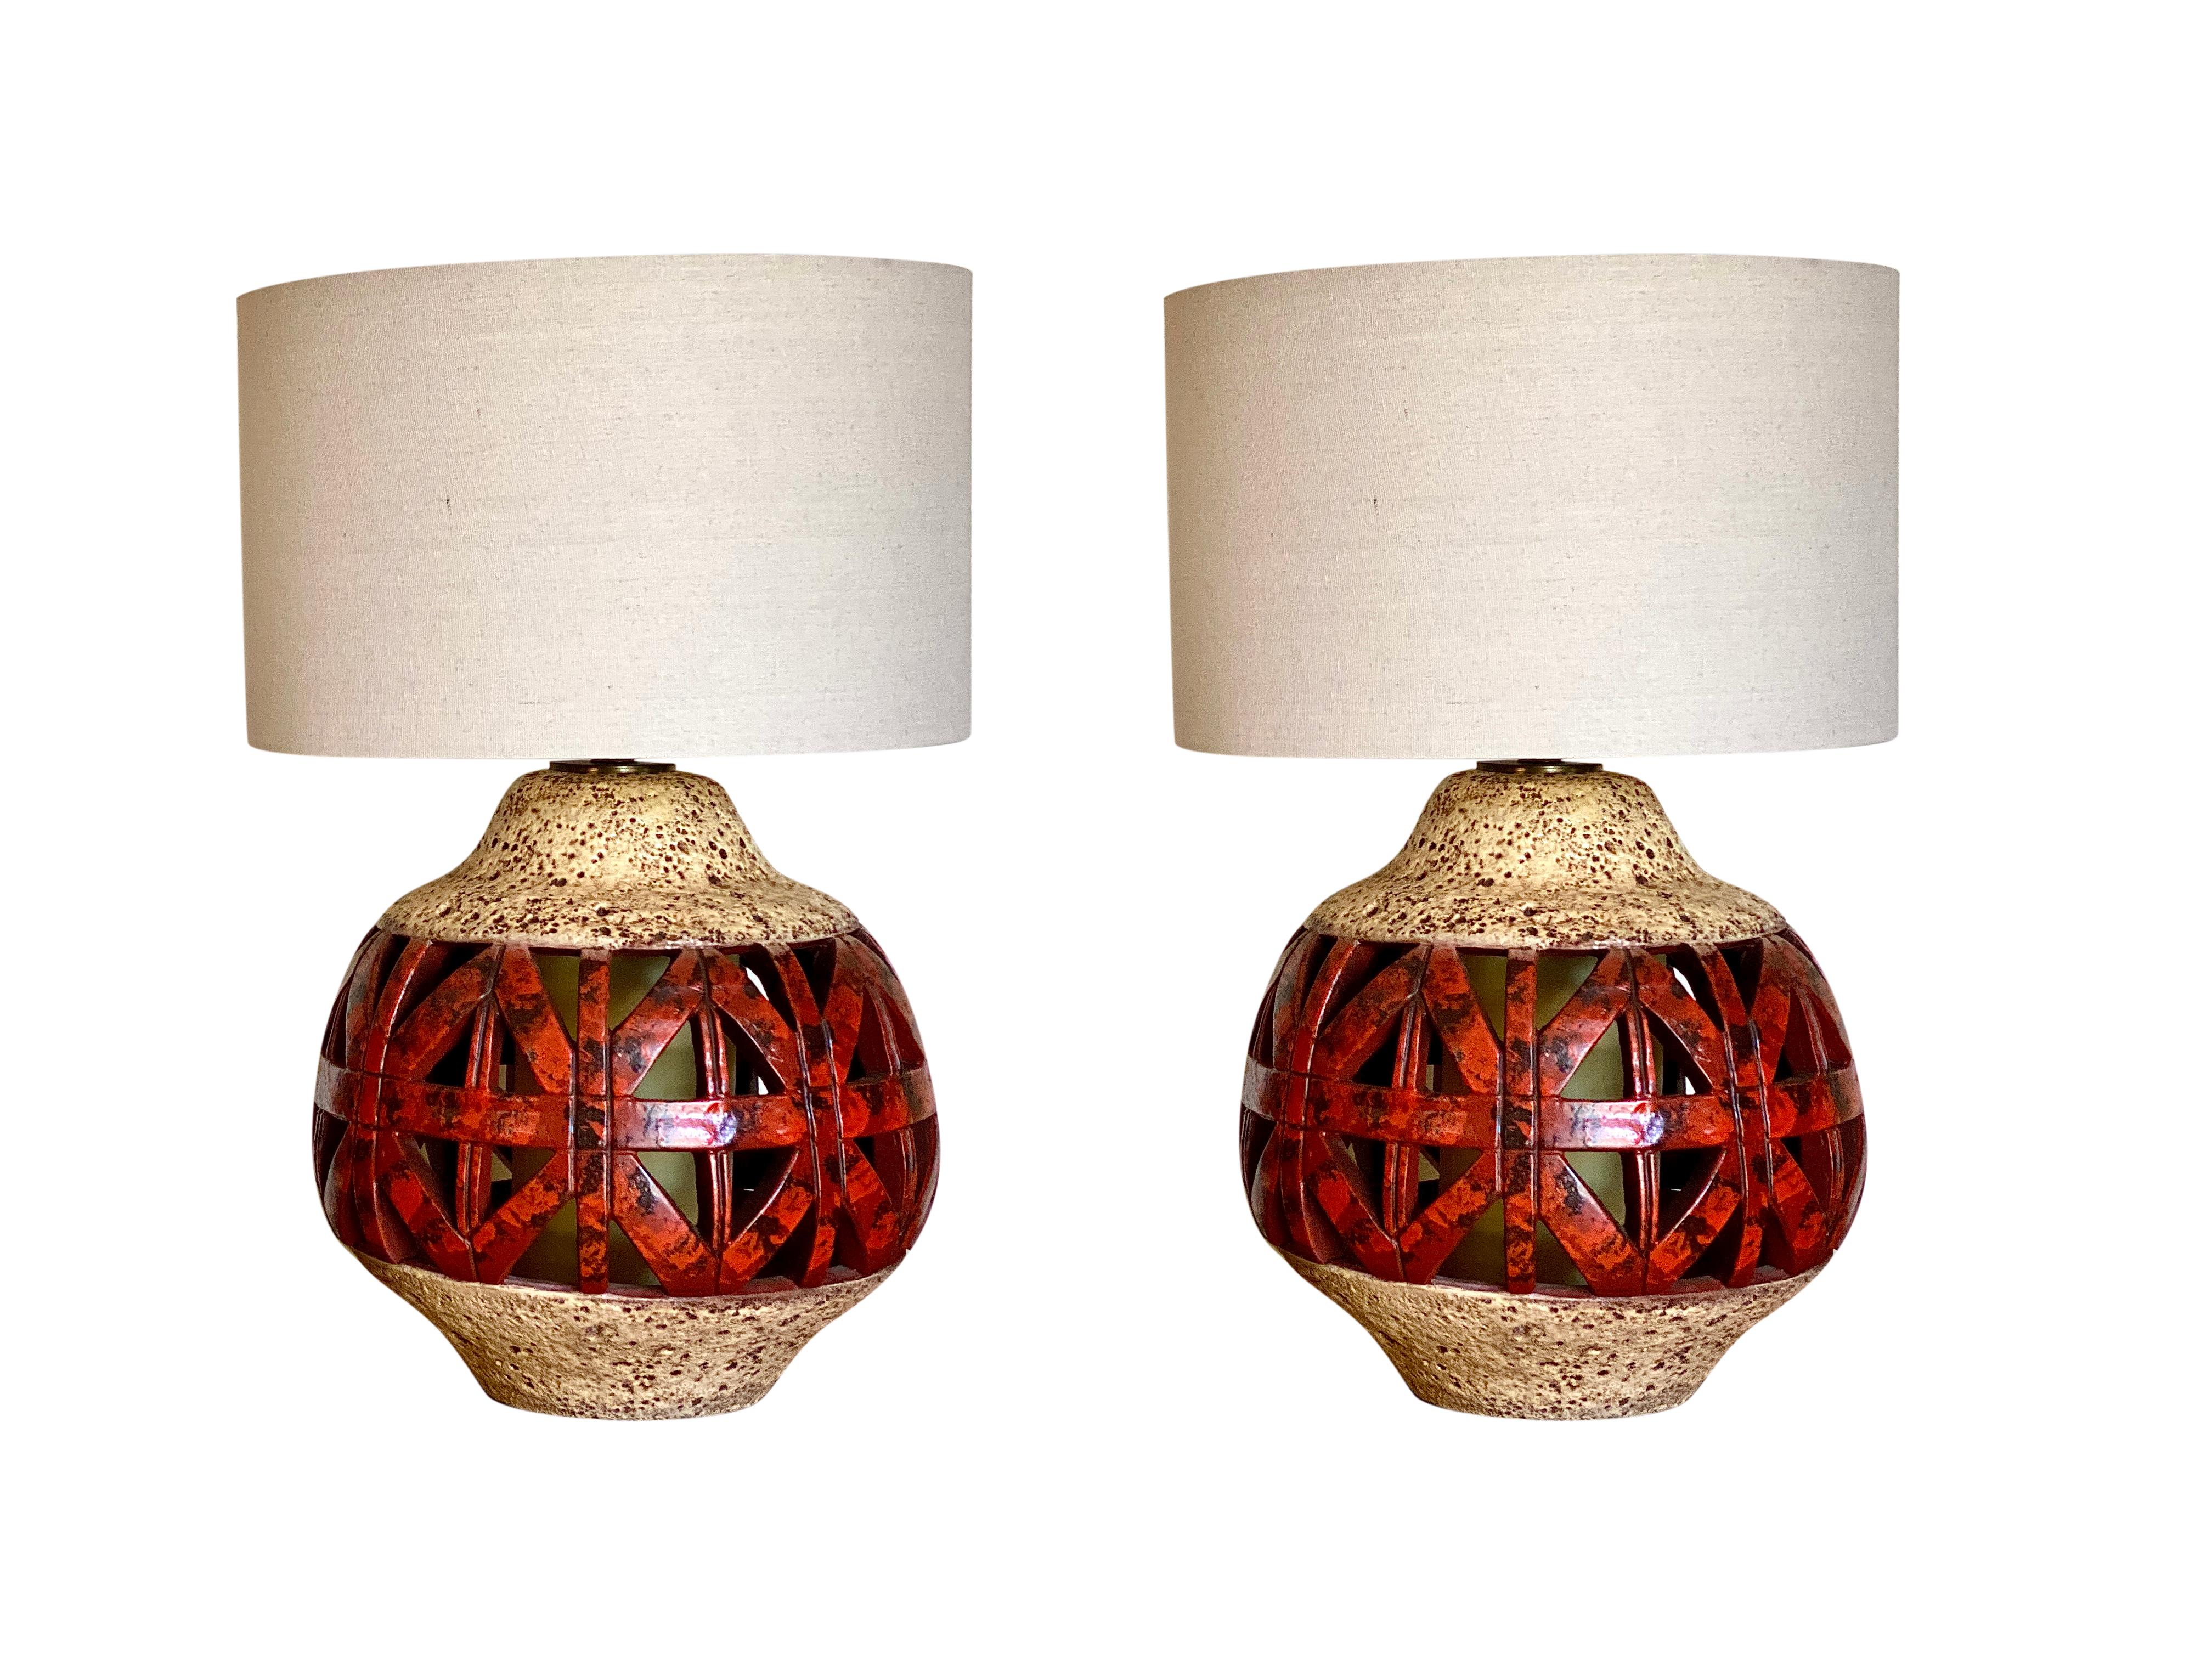 This beautiful pair of Mid-Century Modern ceramic lamps has all the characteristics of a cool Mid-Century Modern style. They are in great condition. Each lamp has a globe inside the ceramic body that also lights up. It can be turned on or off from